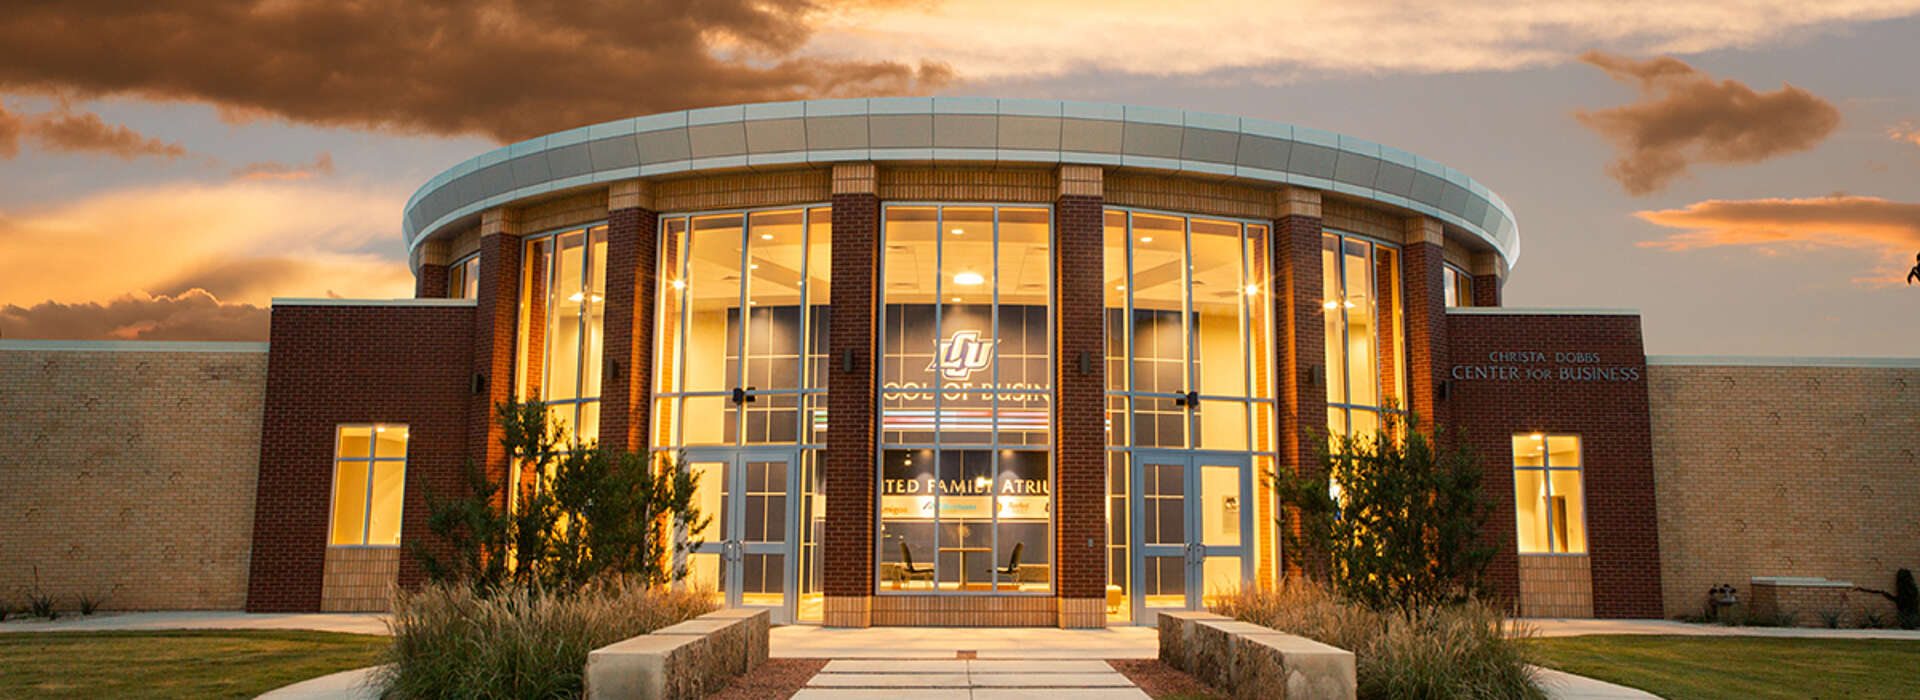 LCU School of Business at sunset